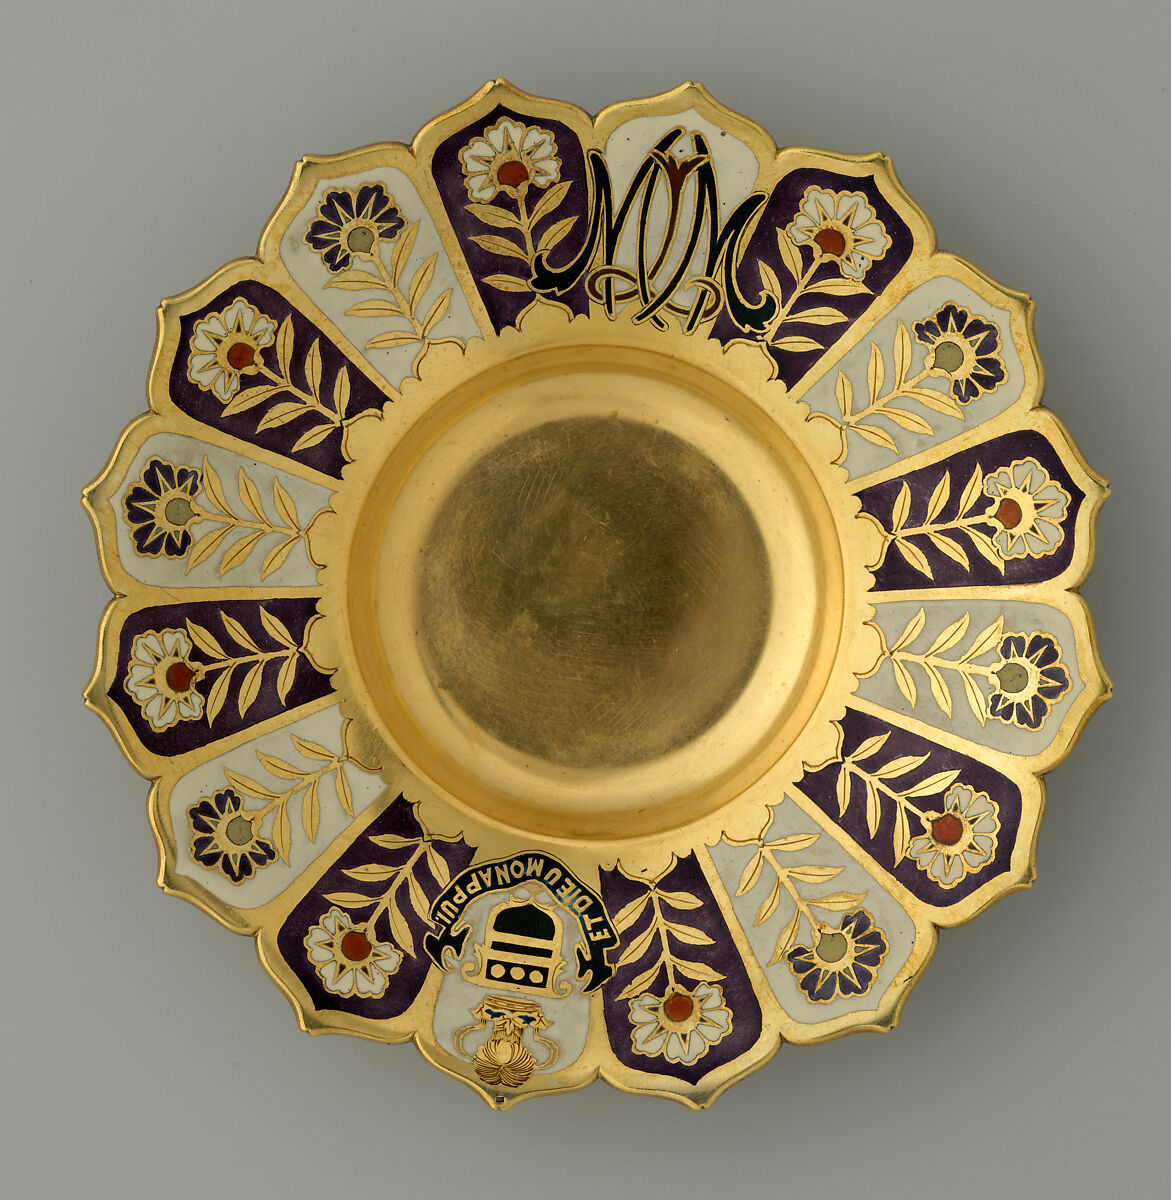 Saucer from the Mackay Service, Tiffany &amp; Co. (1837–present), Silver-gilt and enamel, American 